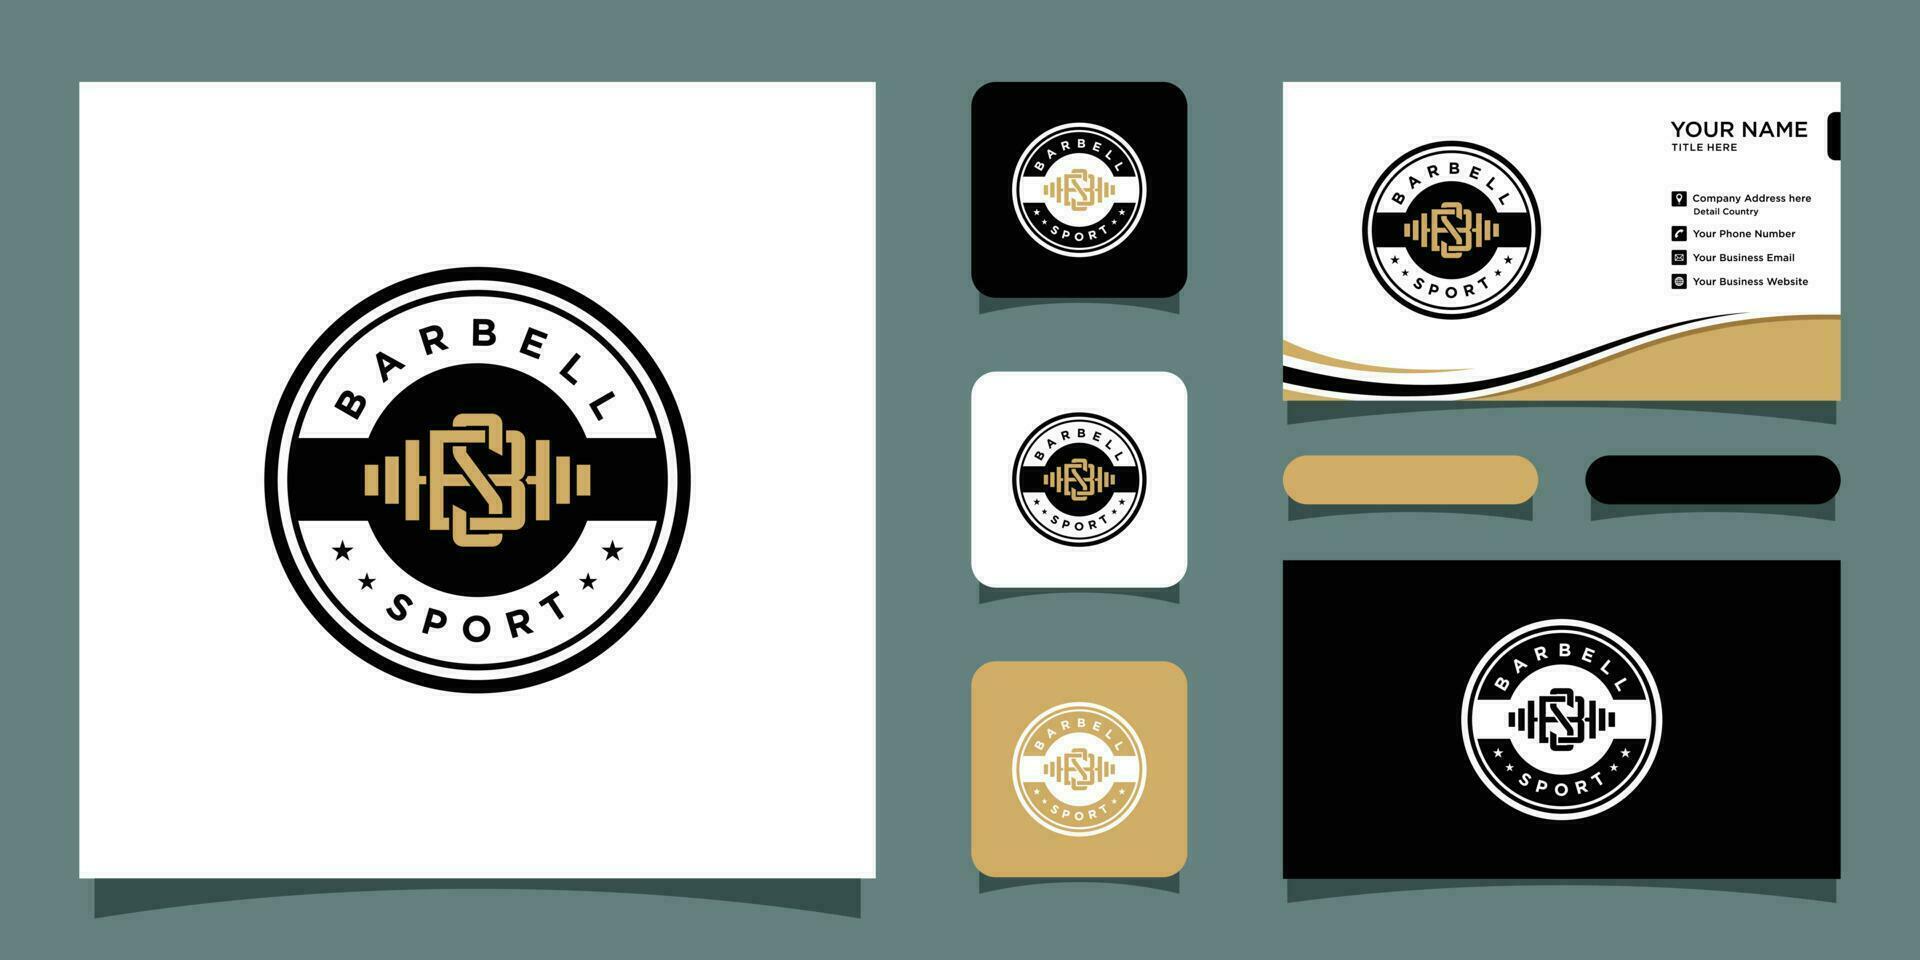 barbell sport logo. vintage and badge concept with business card design Premium Vector